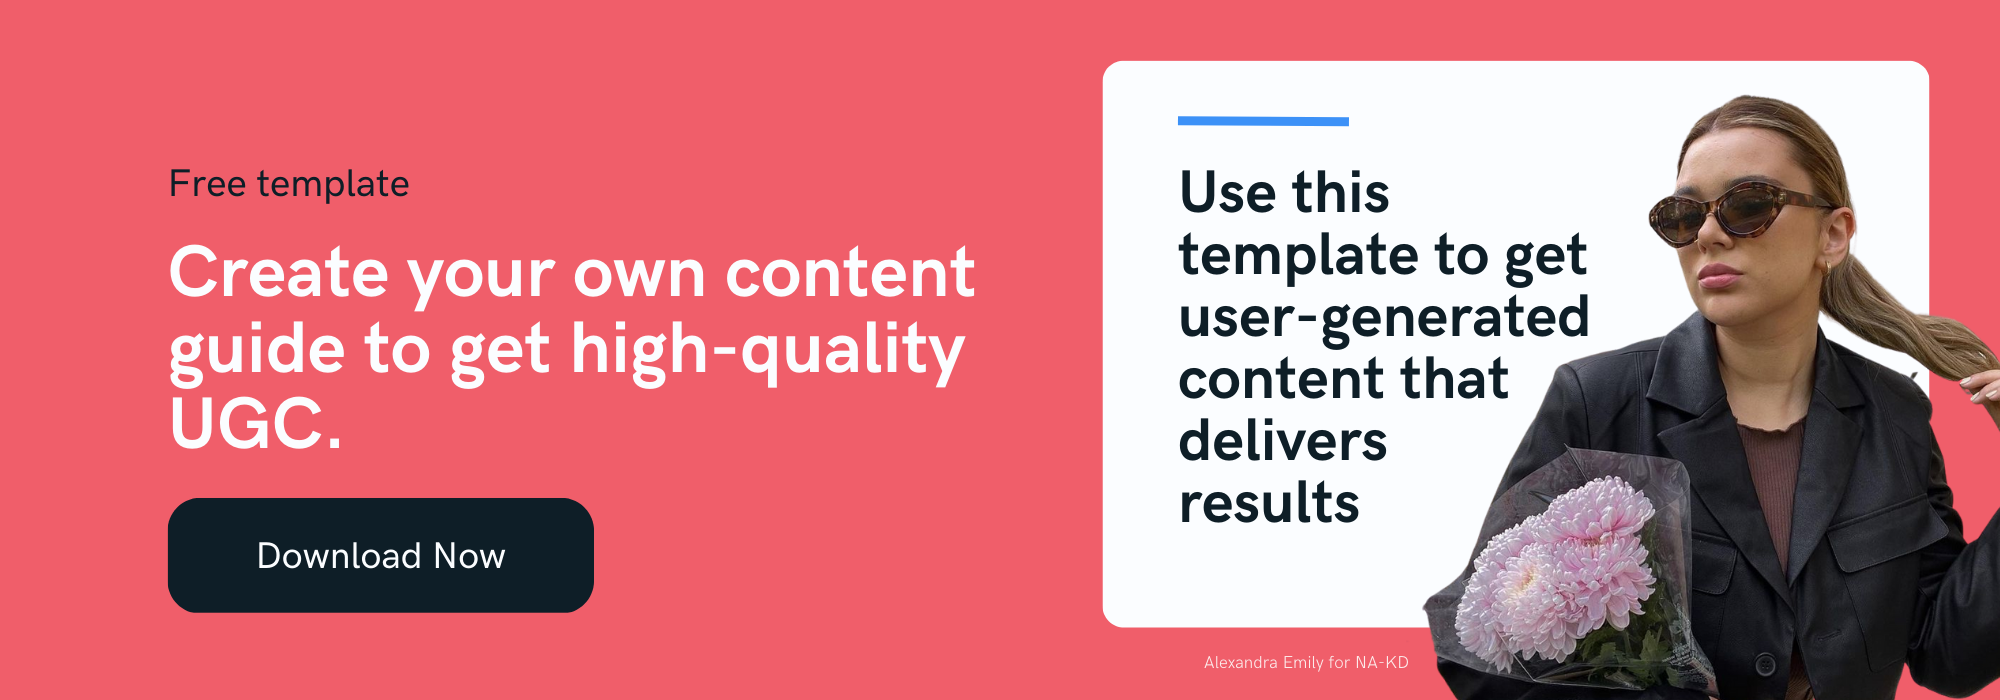 Content Guideline Template for Brands with Insider Tips - Guidelines to Help You Get Ambassador Marketing Content That Delivers Results